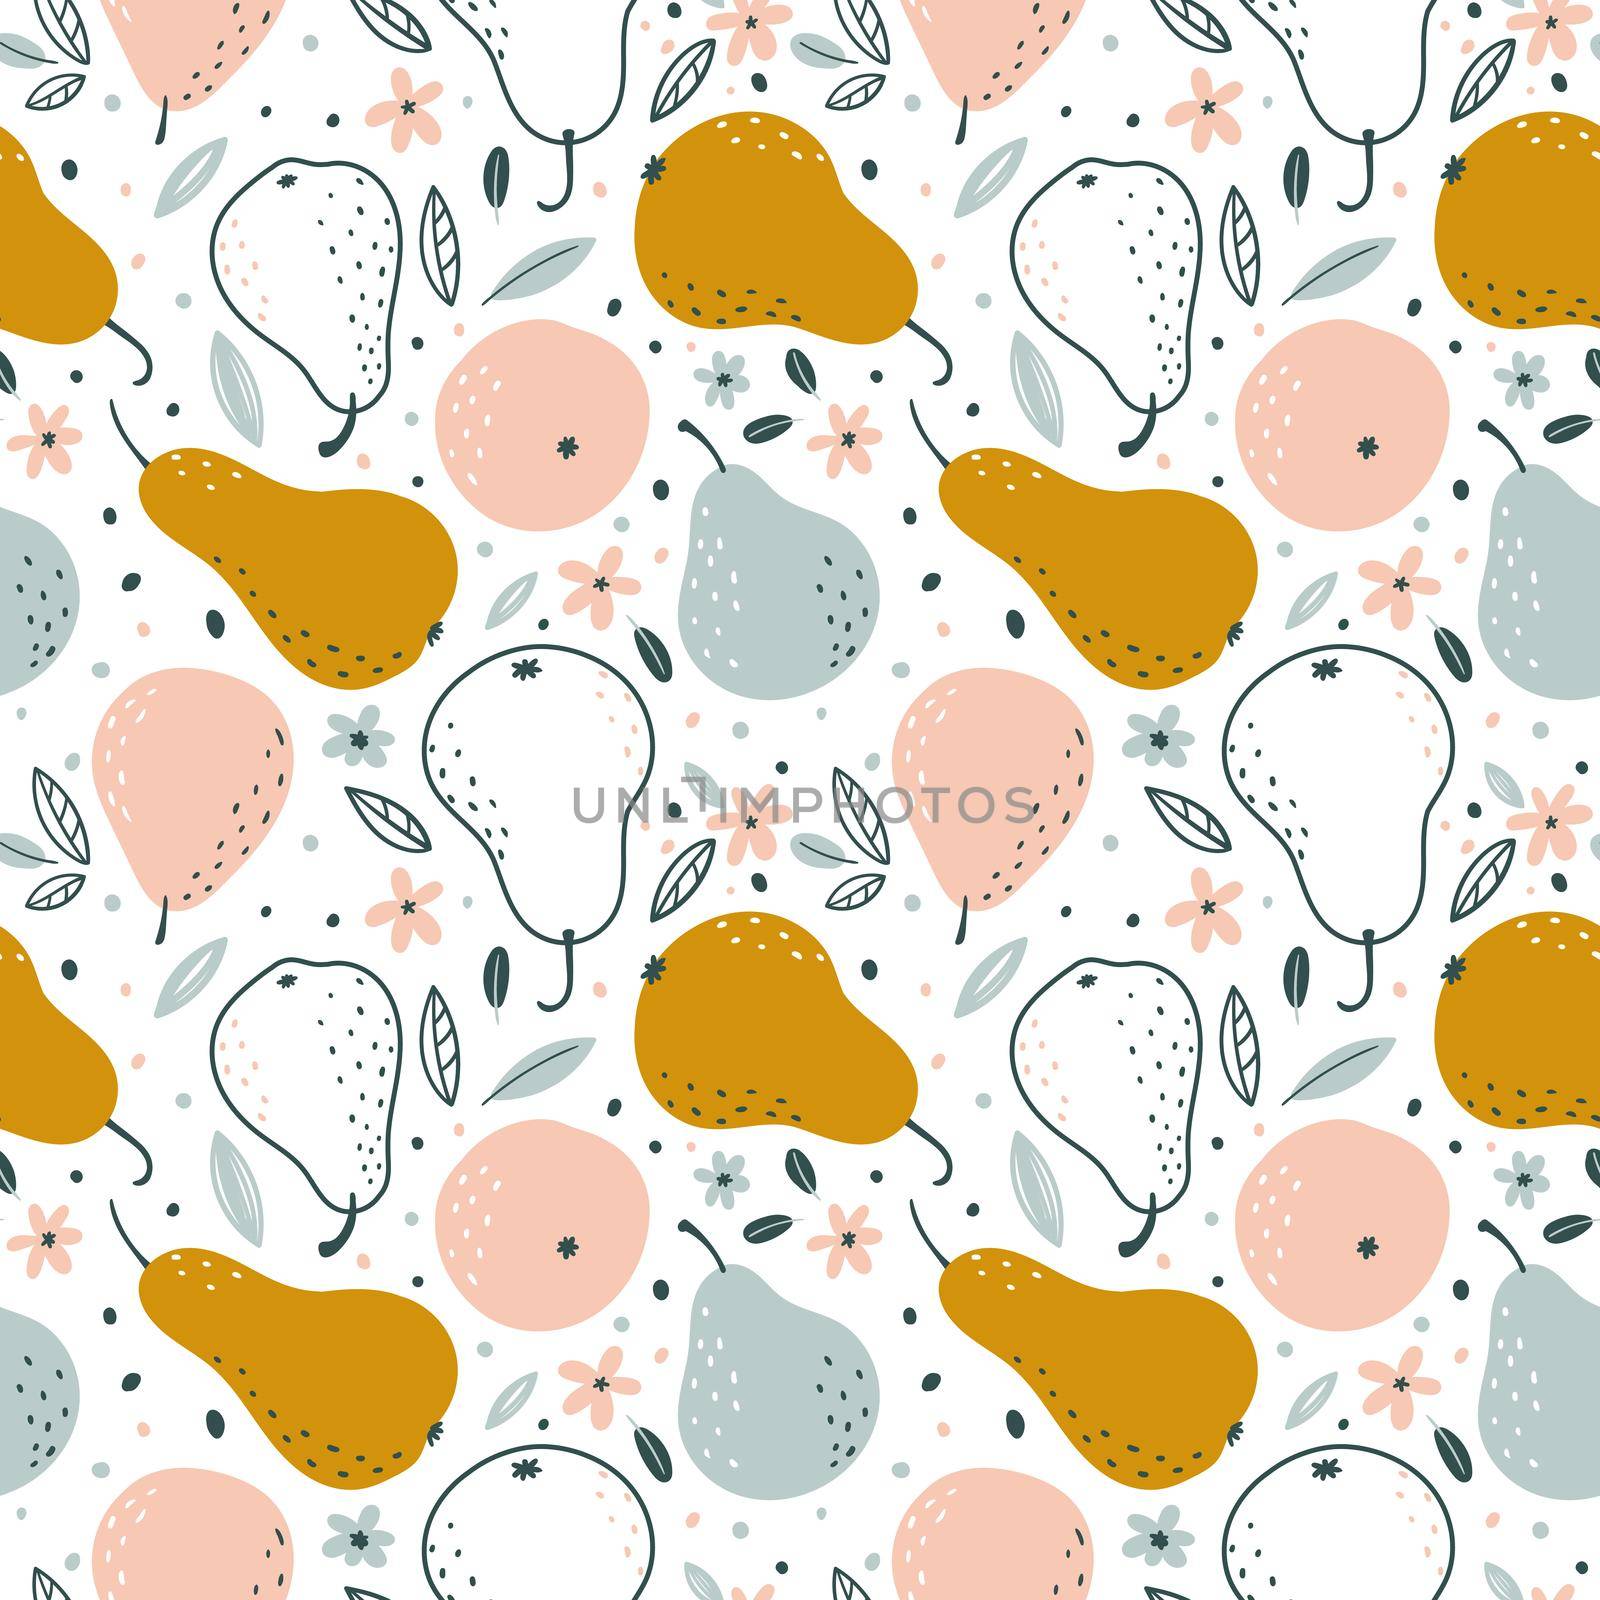 Seamless pattern with pears in Scandinavian style on a white background. Creative texture for fabric, wrapping, textile, wallpaper. Vector illustration.